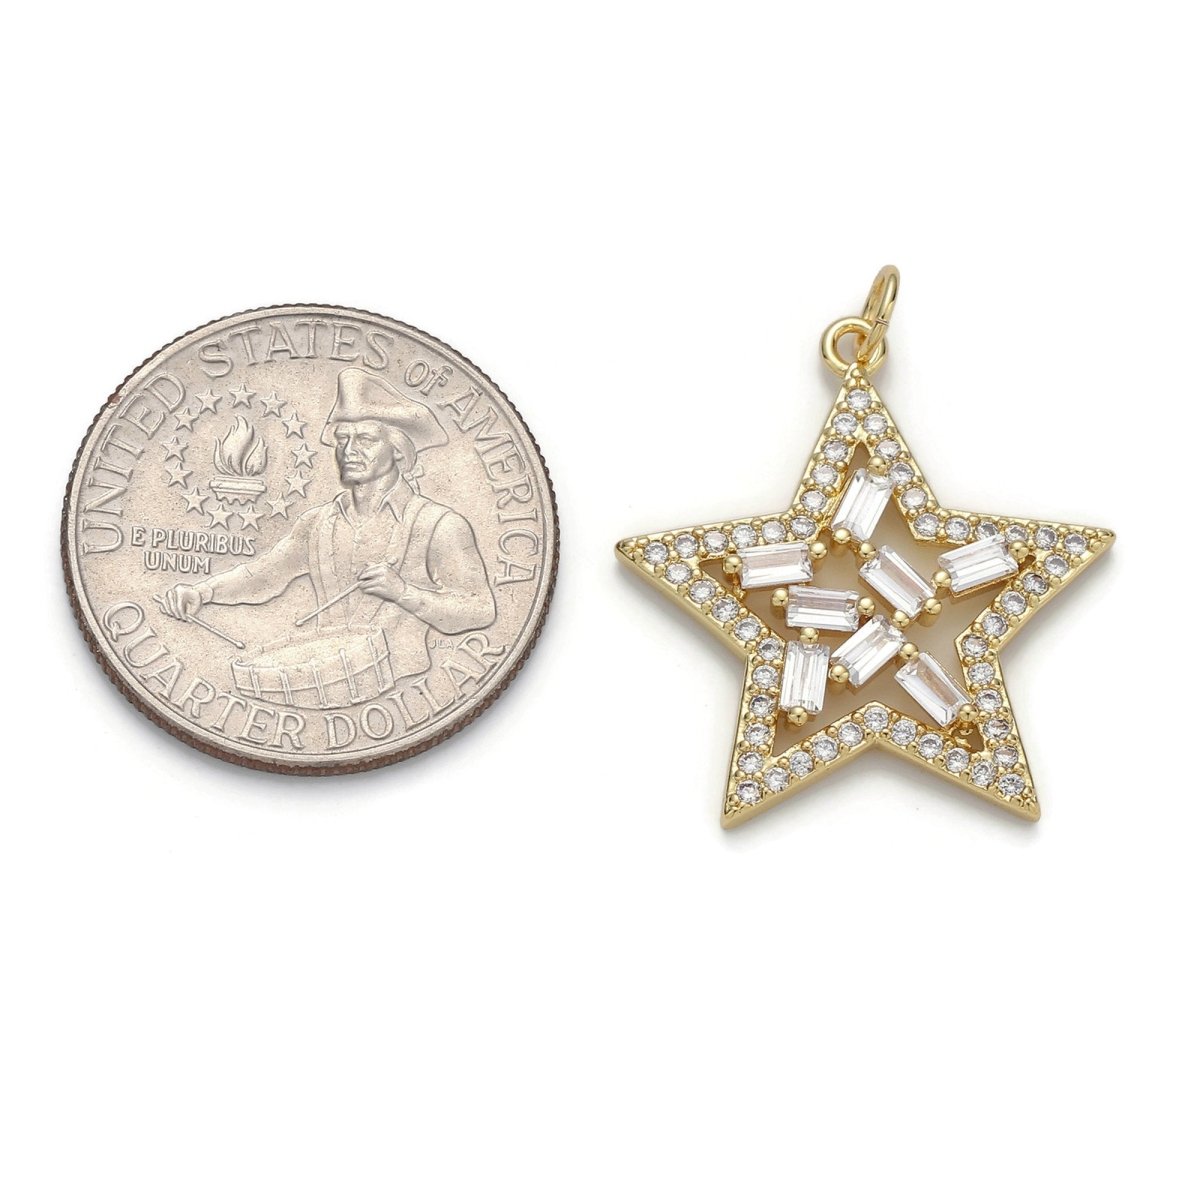 24k Gold Filled Micro Pave Star Charm, Cubic Zirconia Star Pendant Charm, Gold Filled Charm, For DIY Jewelry D-041 - DLUXCA